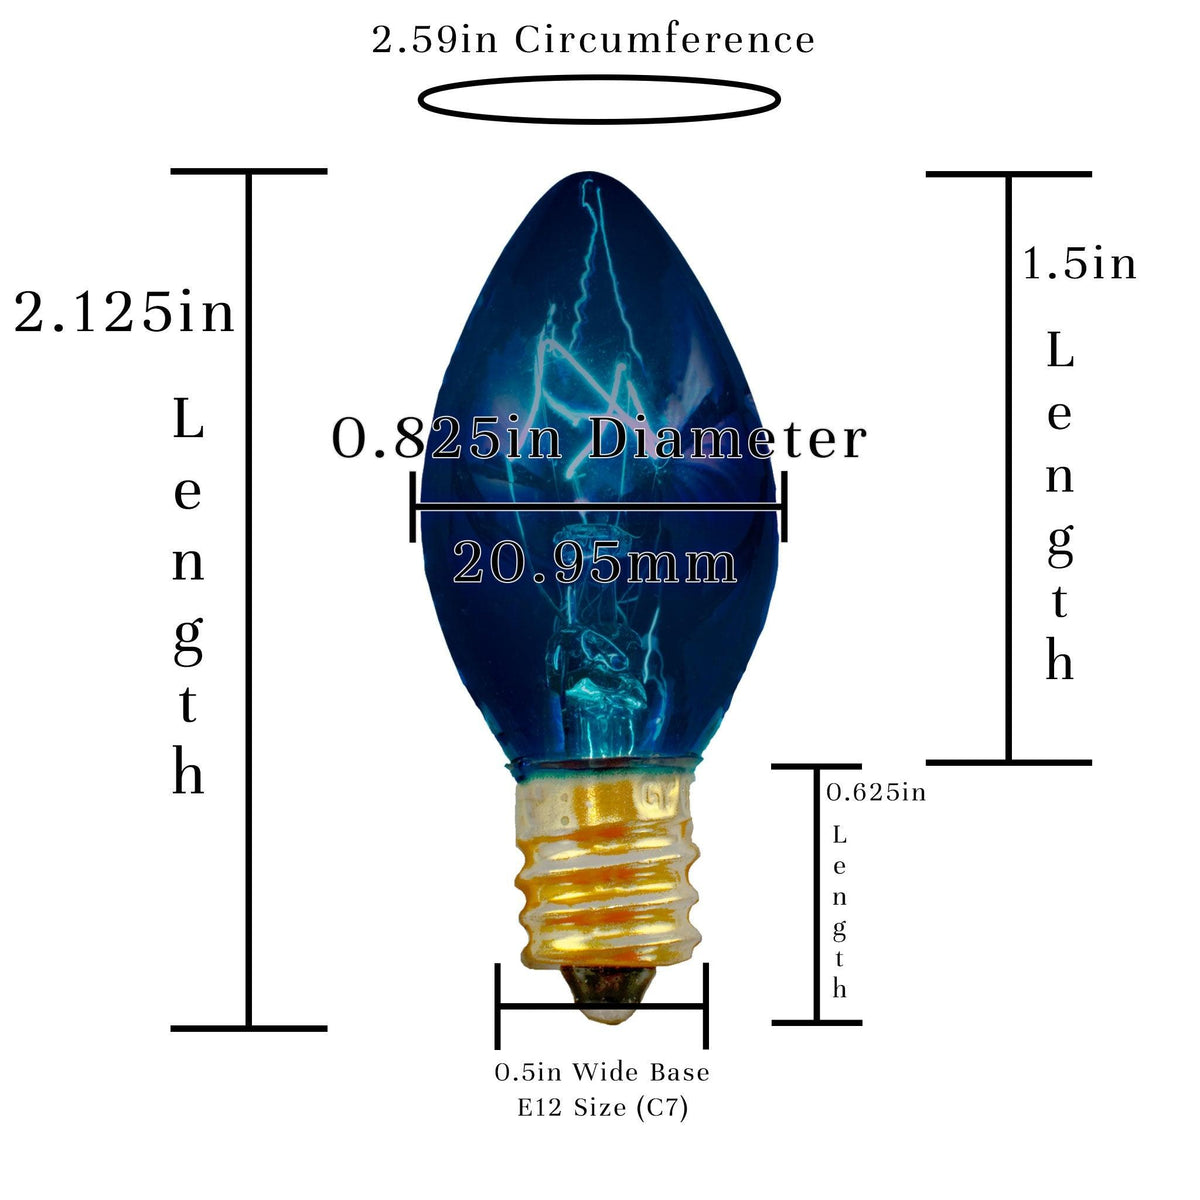 25FT Blue Outdoor String Lighting Set!    Choose between Twinkling Bulbs and Steady Burning Bulbs, White Wire or Green Wire Cords, C7 & C9 Size available.  On sale at leedisplay.com